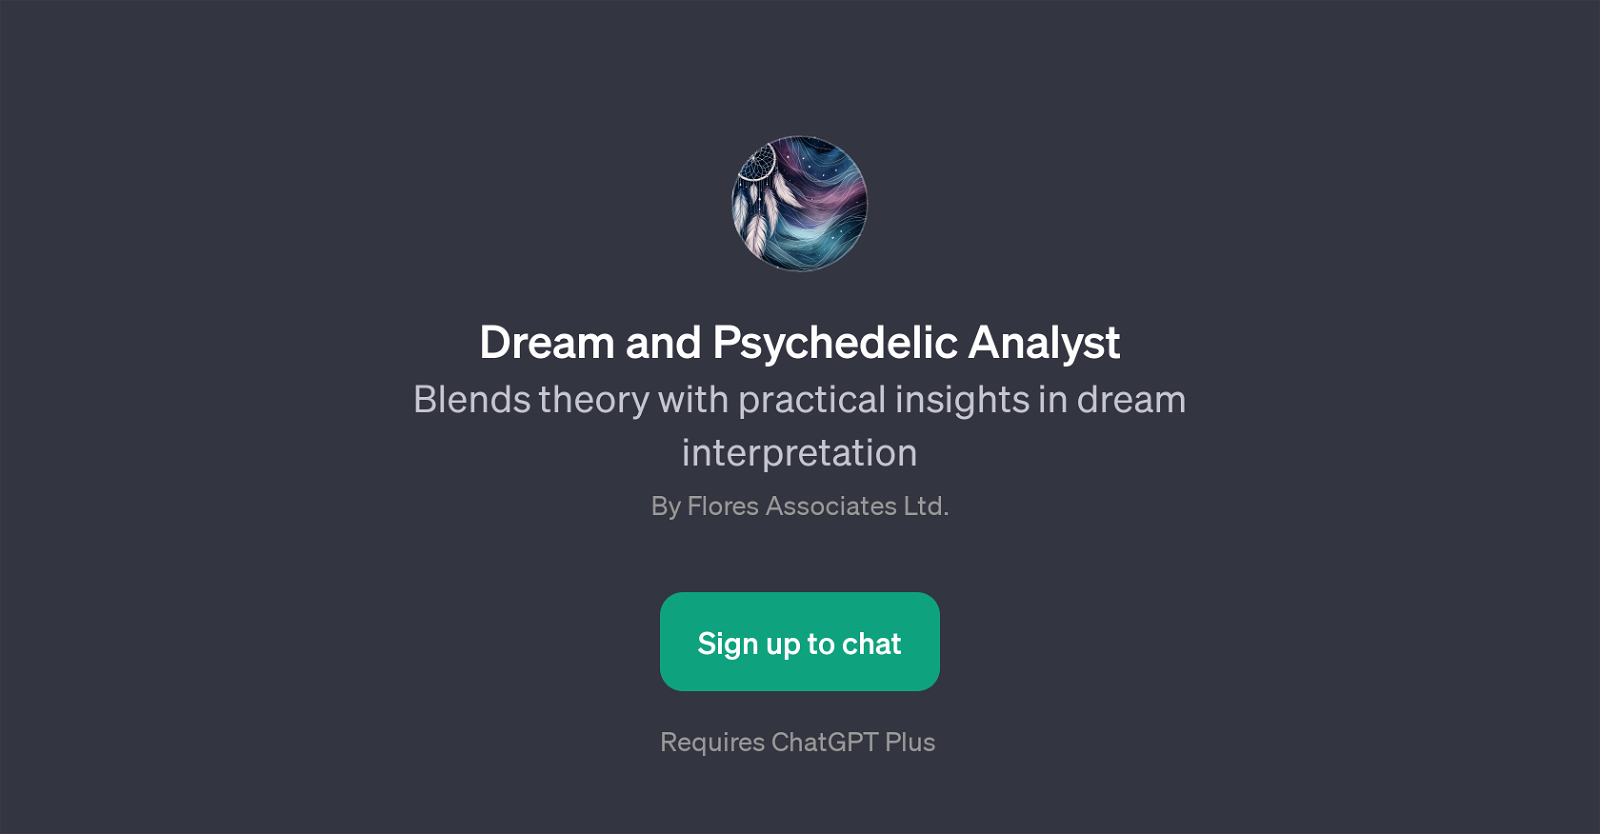 Dream and Psychedelic Analyst website